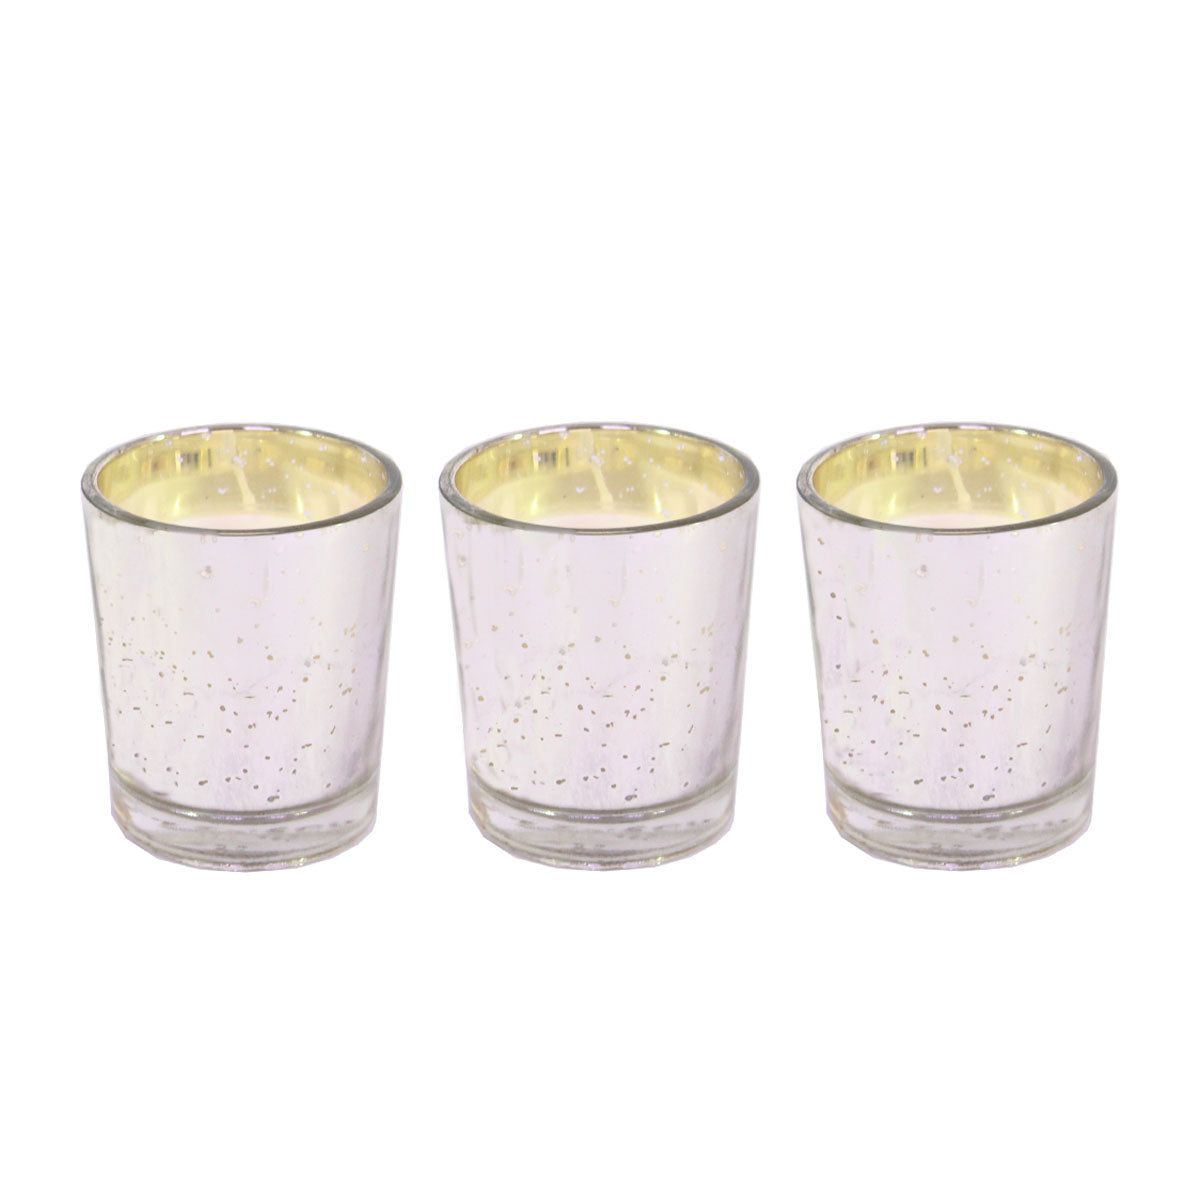 Hosley Set 3 Fragrance Metallic Silver Glass Candle for Decoration